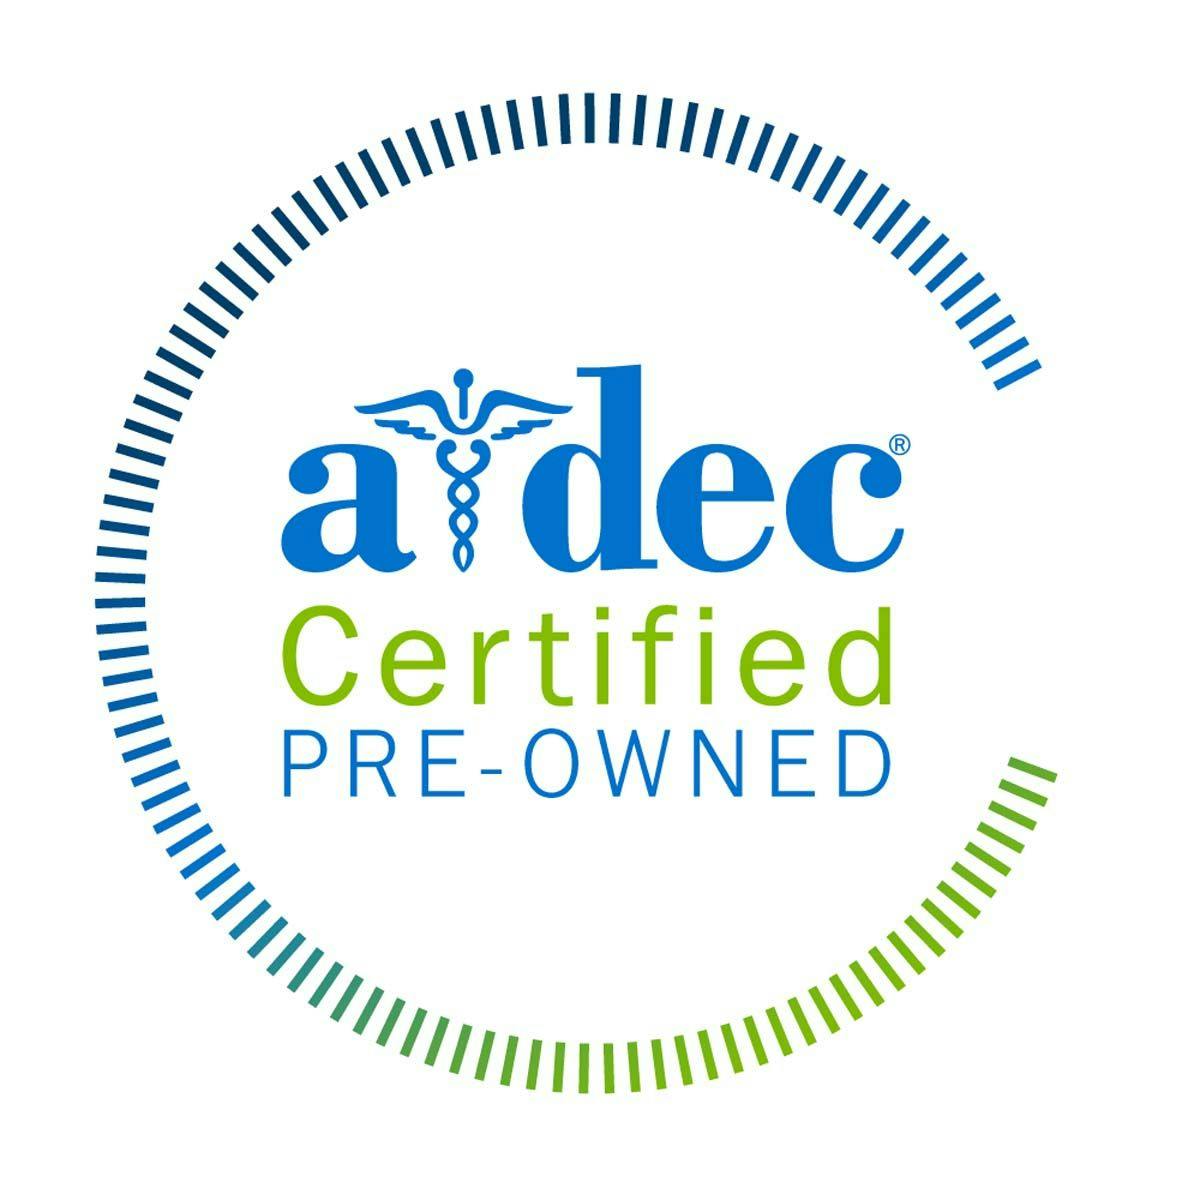 A-dec Launches Certified Pre-Owned Program. Image credit: © A-dec